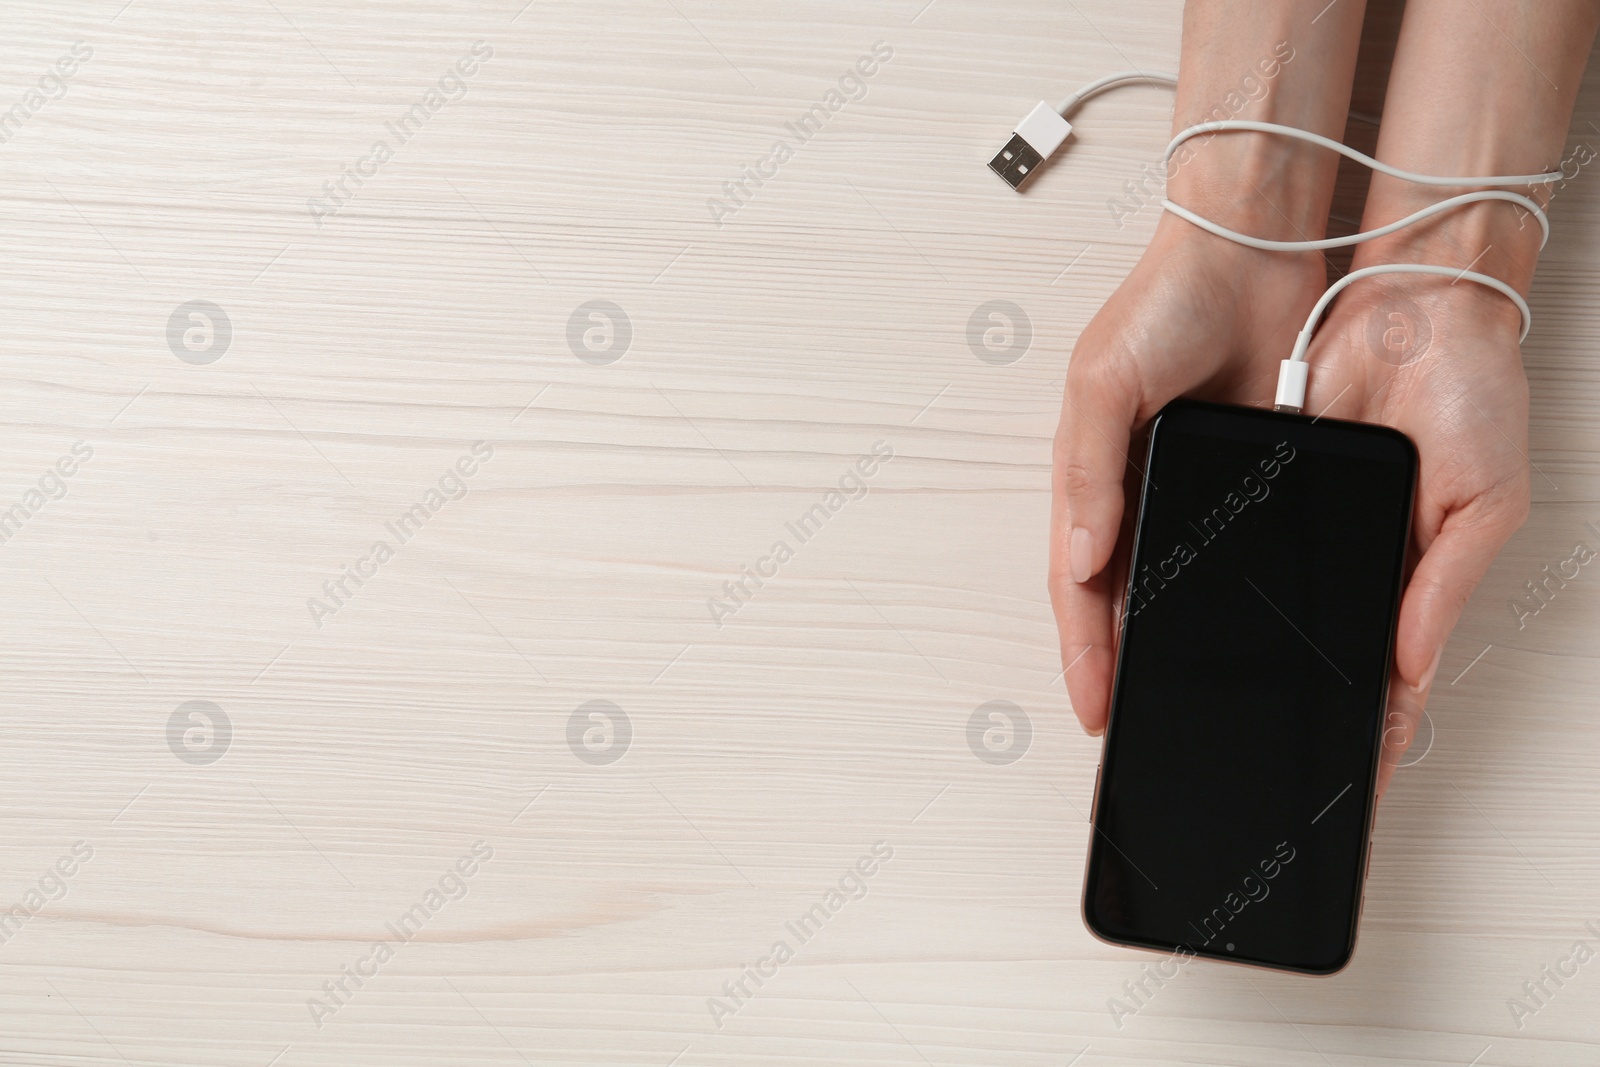 Photo of Internet addiction. Top view of woman holding phone at wooden table, hand tied to device with charging cable